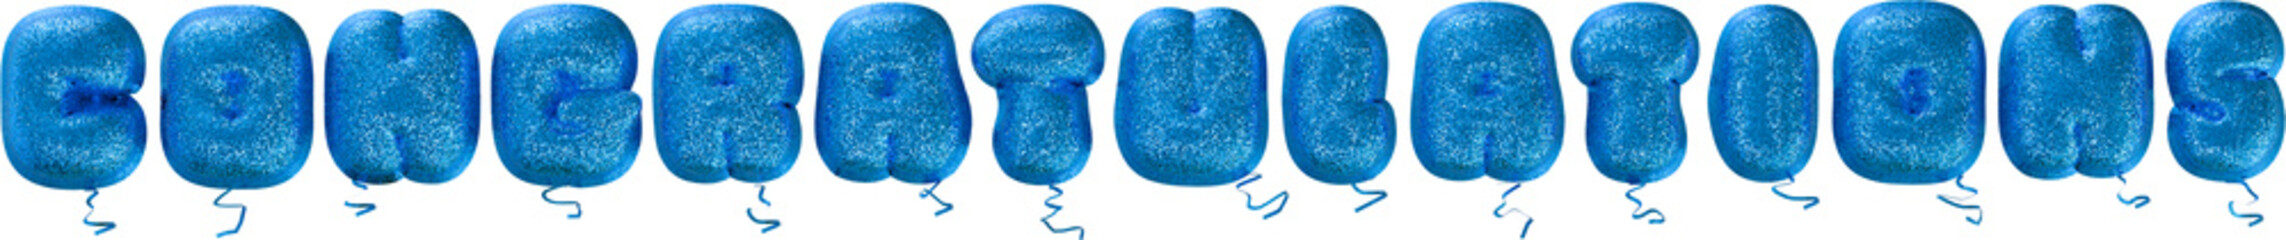 realistic isolated blue glitter balloon text of Congratulations on the transparent background.